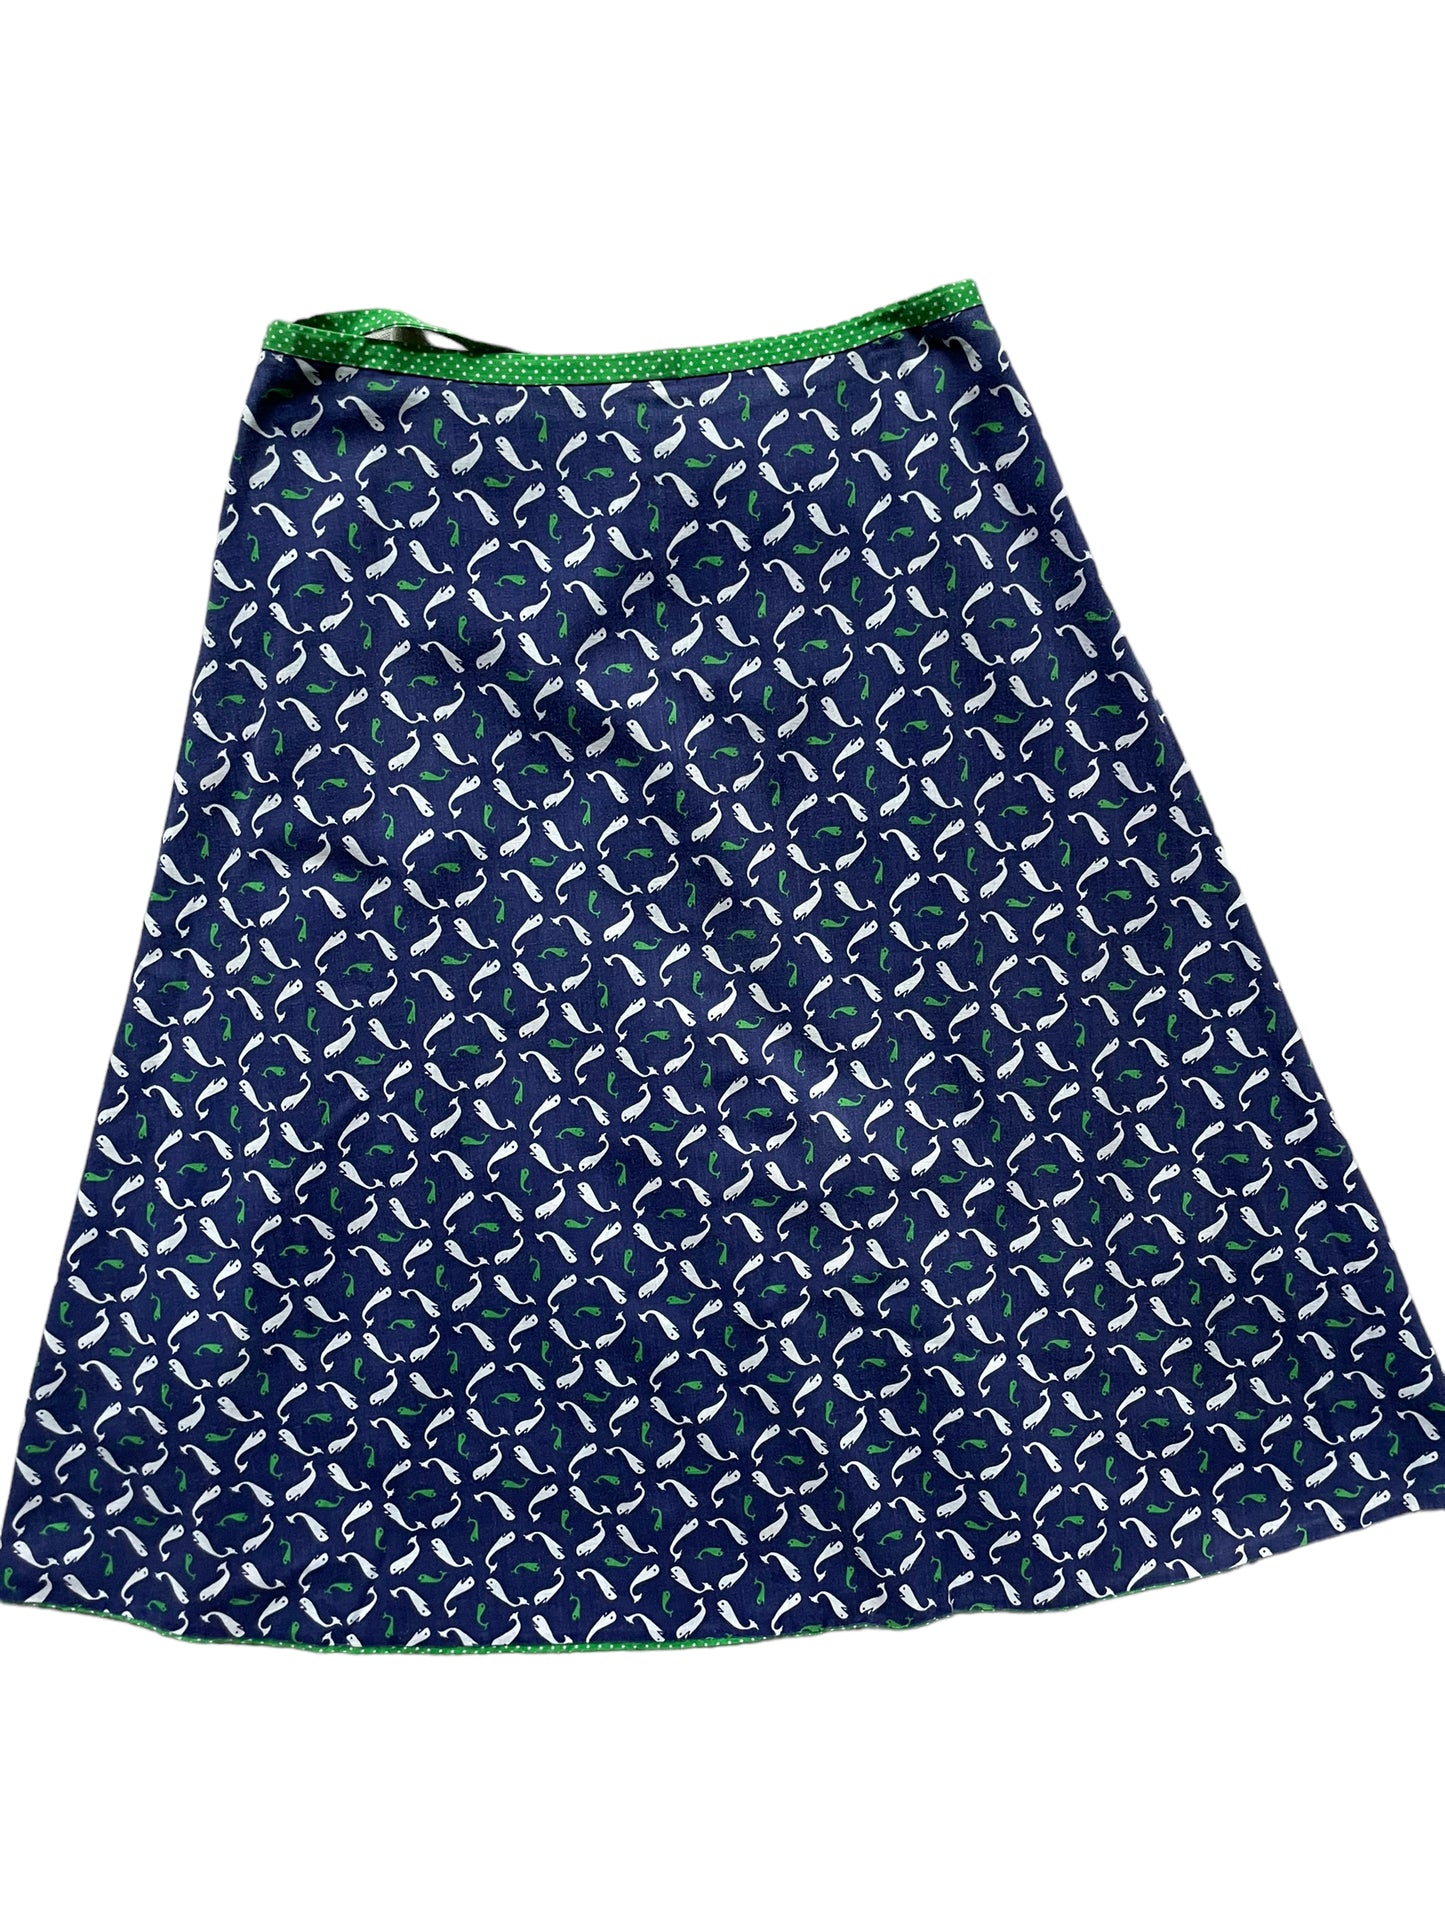 Full back view of Vintage 1970s Whale Wrap Skirt 